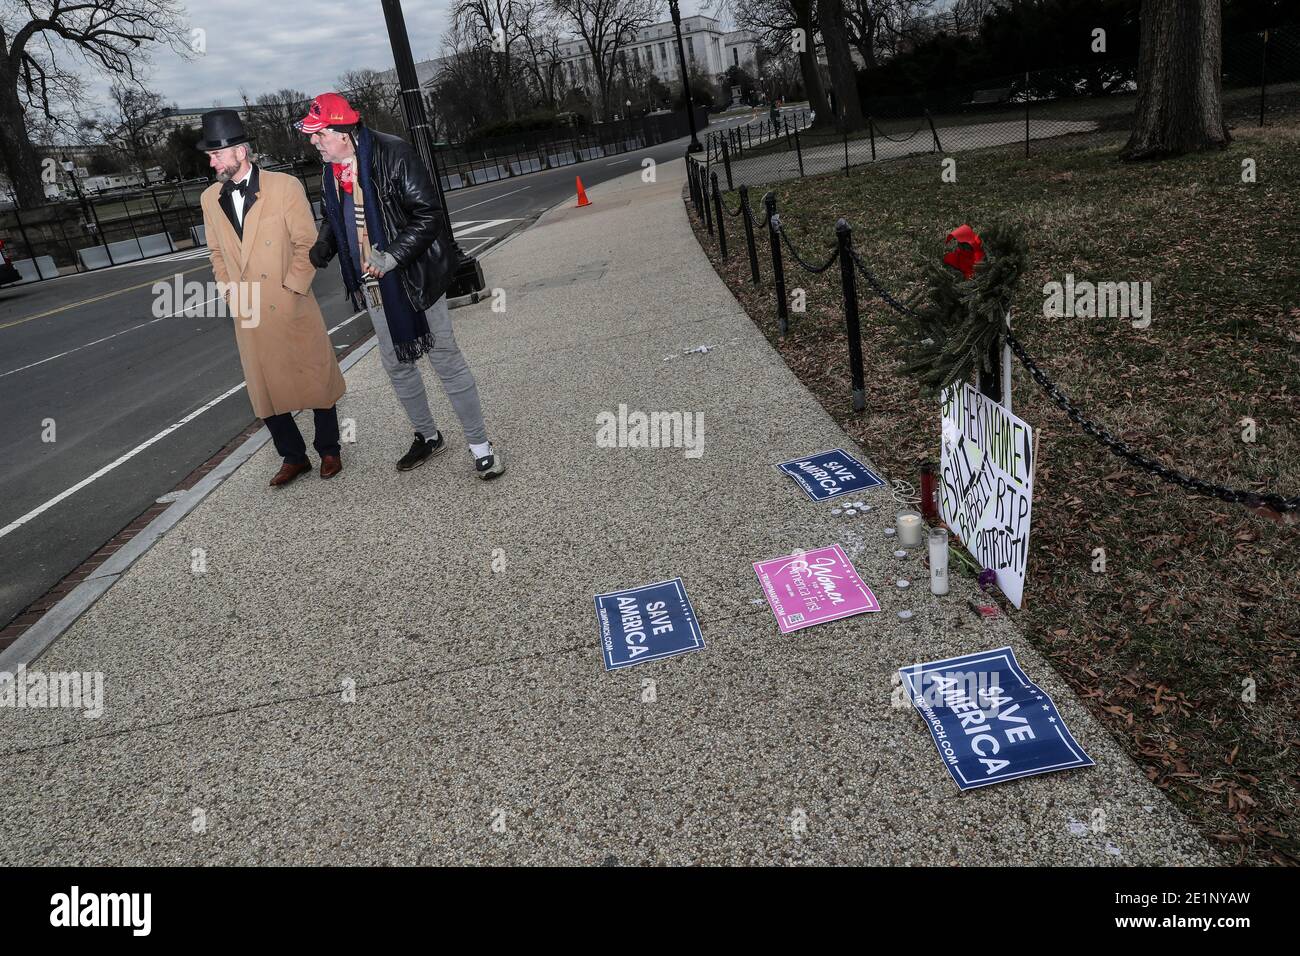 Washington, USA. 08th Jan, 2021. Supporters of President Trump gather near a make-shrift shrine to Ashli Babbitt, 39, outside the U.S. Capitol on January 08, 2021 in Washington, DC. Babbitt, an Air Force veteran, was shot and killed while storming the Capitol with a pro-Trump mob two days before. (Photo by Oliver Contreras/SIPA USA) Credit: Sipa USA/Alamy Live News Stock Photo